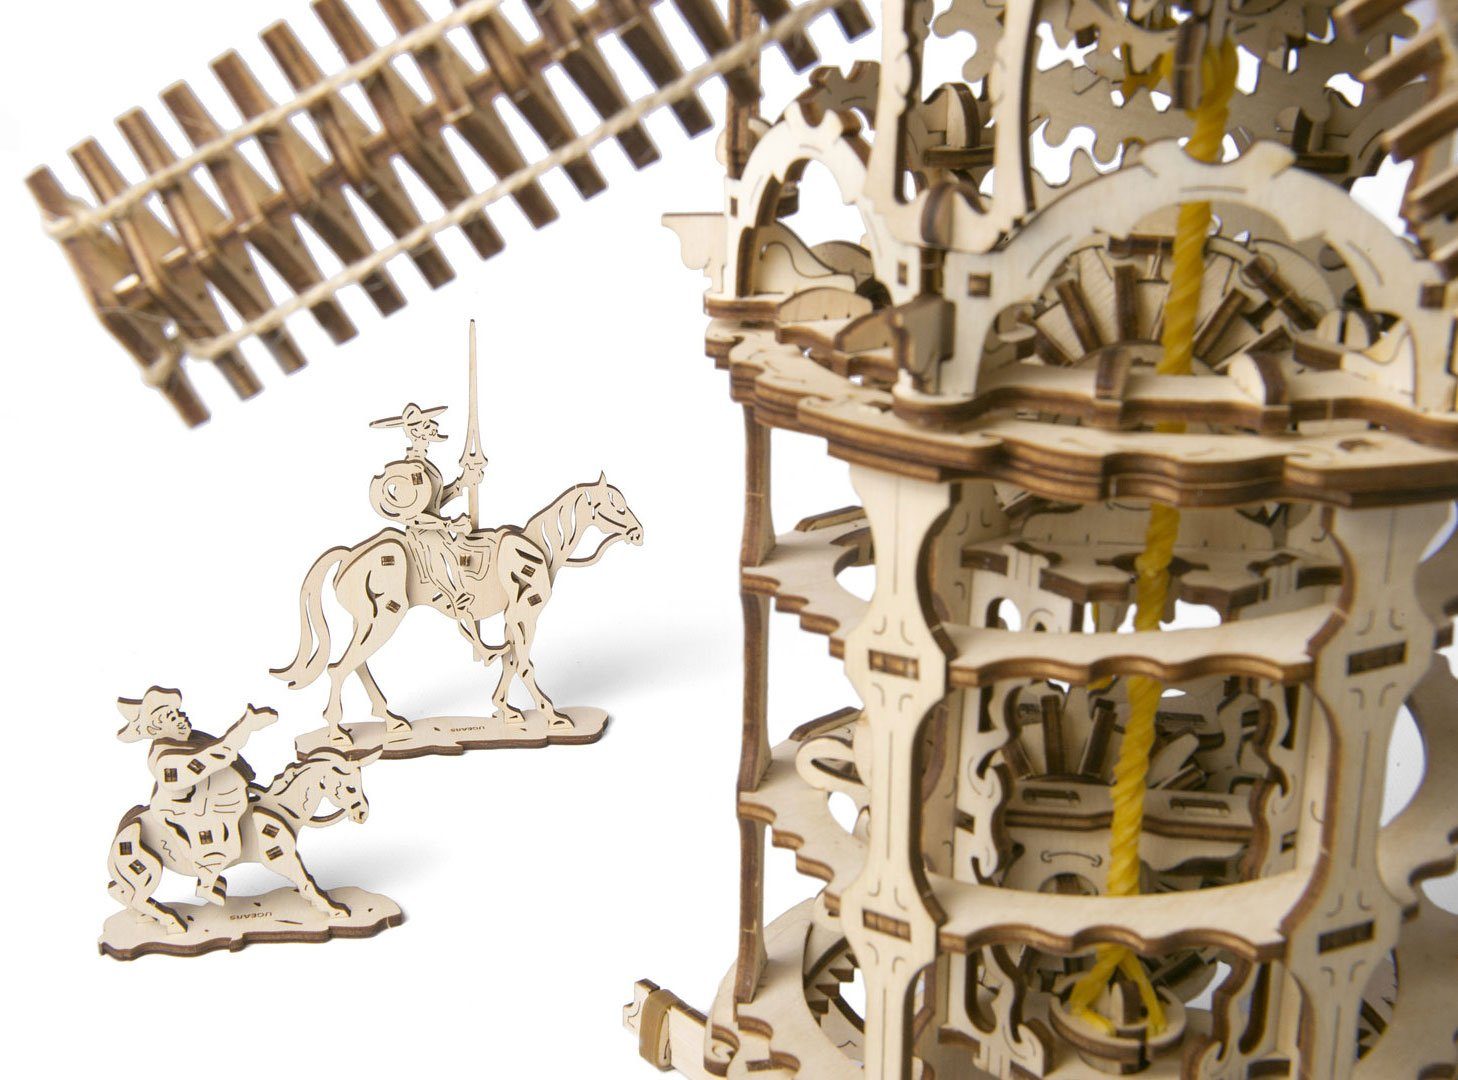 Windmill, 3D-Puzzle 3D-Puzzle Tower WINDMÜHLE Modellbausatz UGEARS - 585 Holz Puzzleteile UGEARS